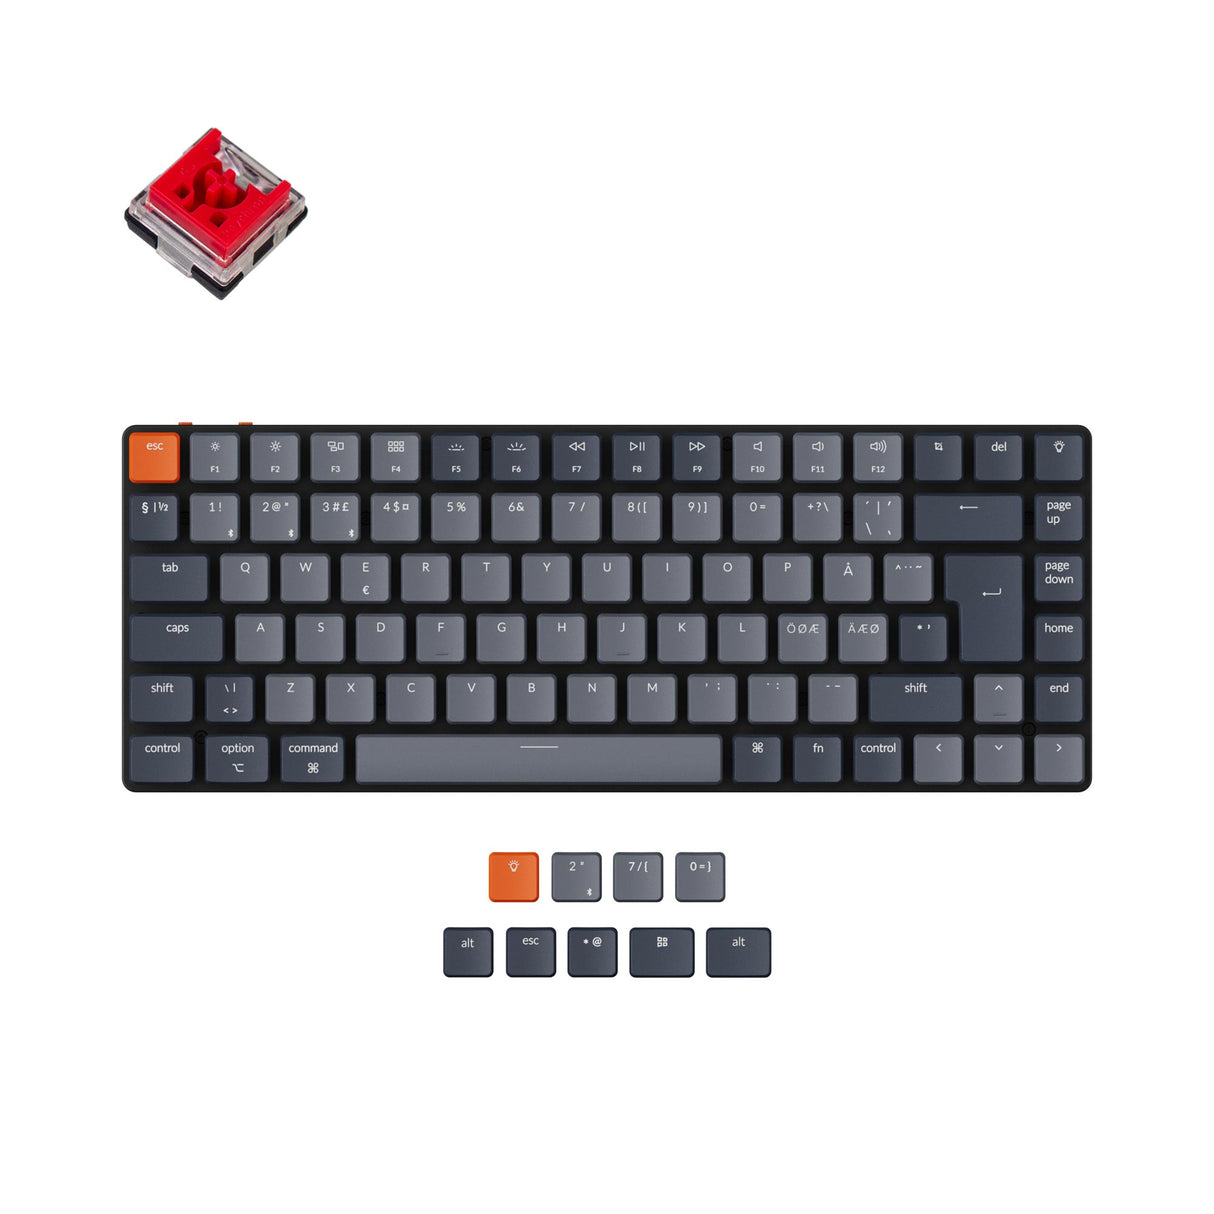 Keychron K3 Nordic ISO layout wireless ultra slim mechanical keyboard low profile Keychron optical red switch for Mac Windows and Linux